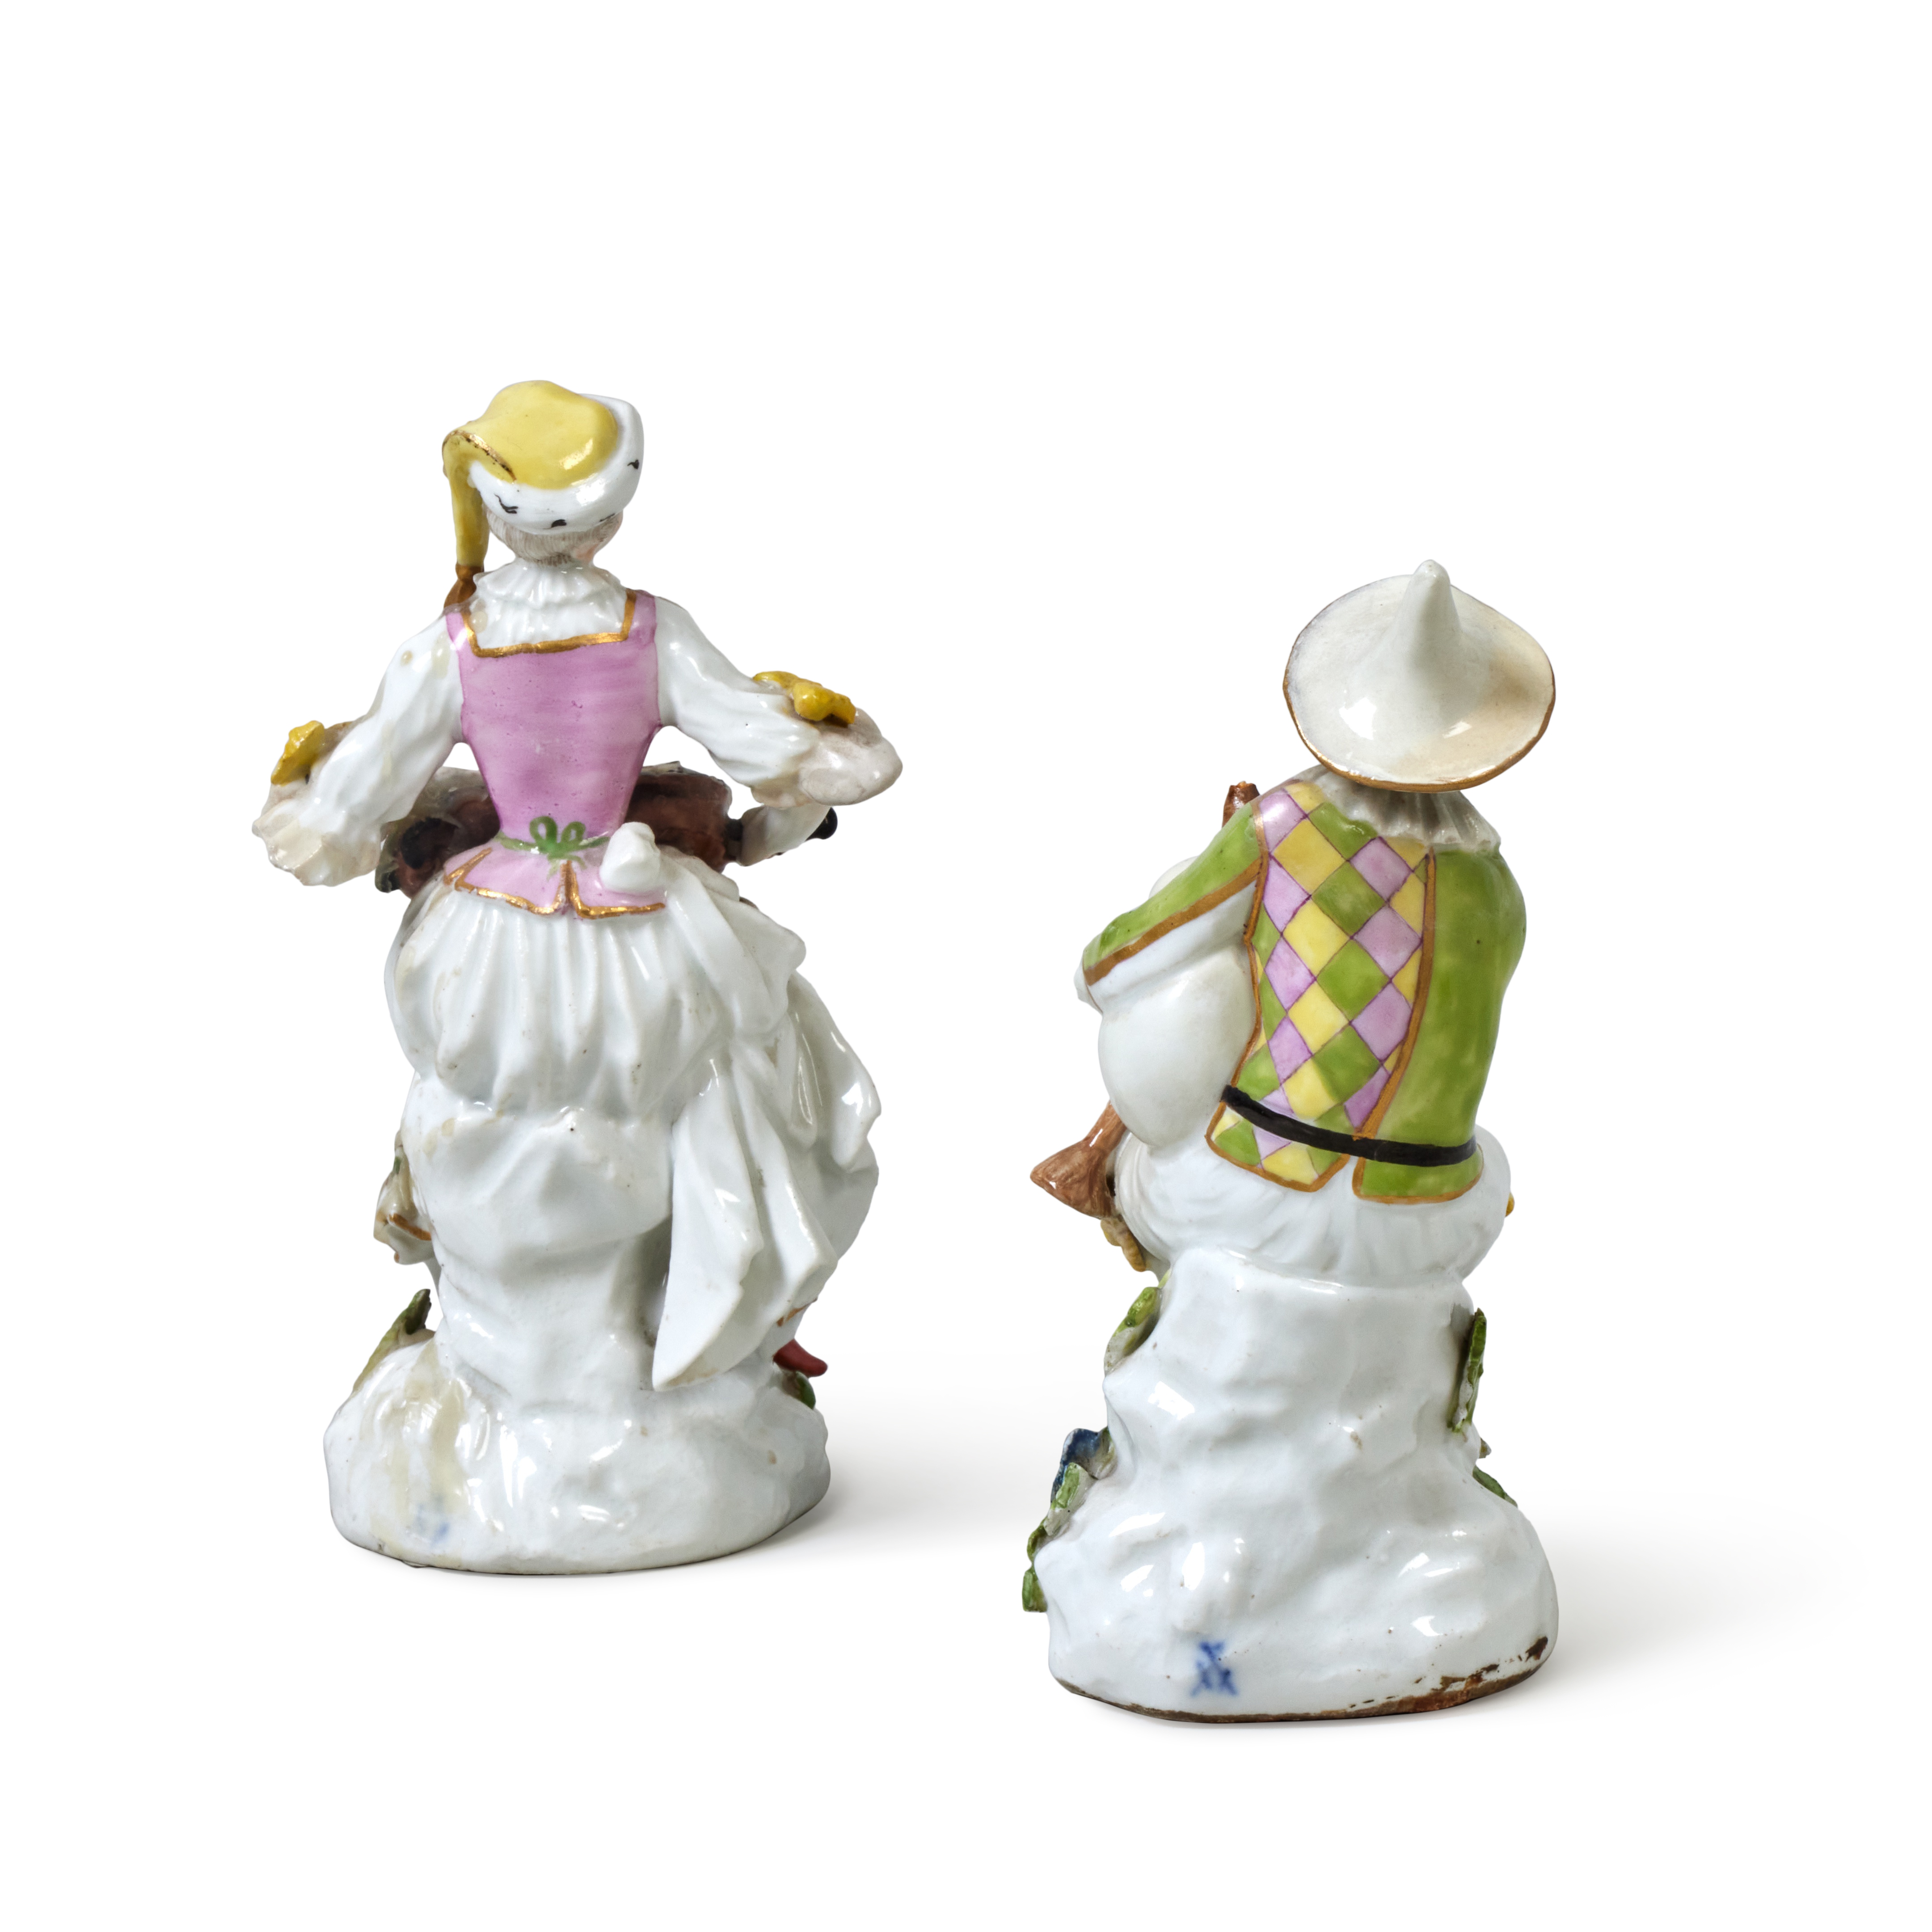 A Meissen Figure of Harlequin Playing Bagpipes and A Meissen Figure of a Lady, Probably Columbine, P - Image 3 of 3